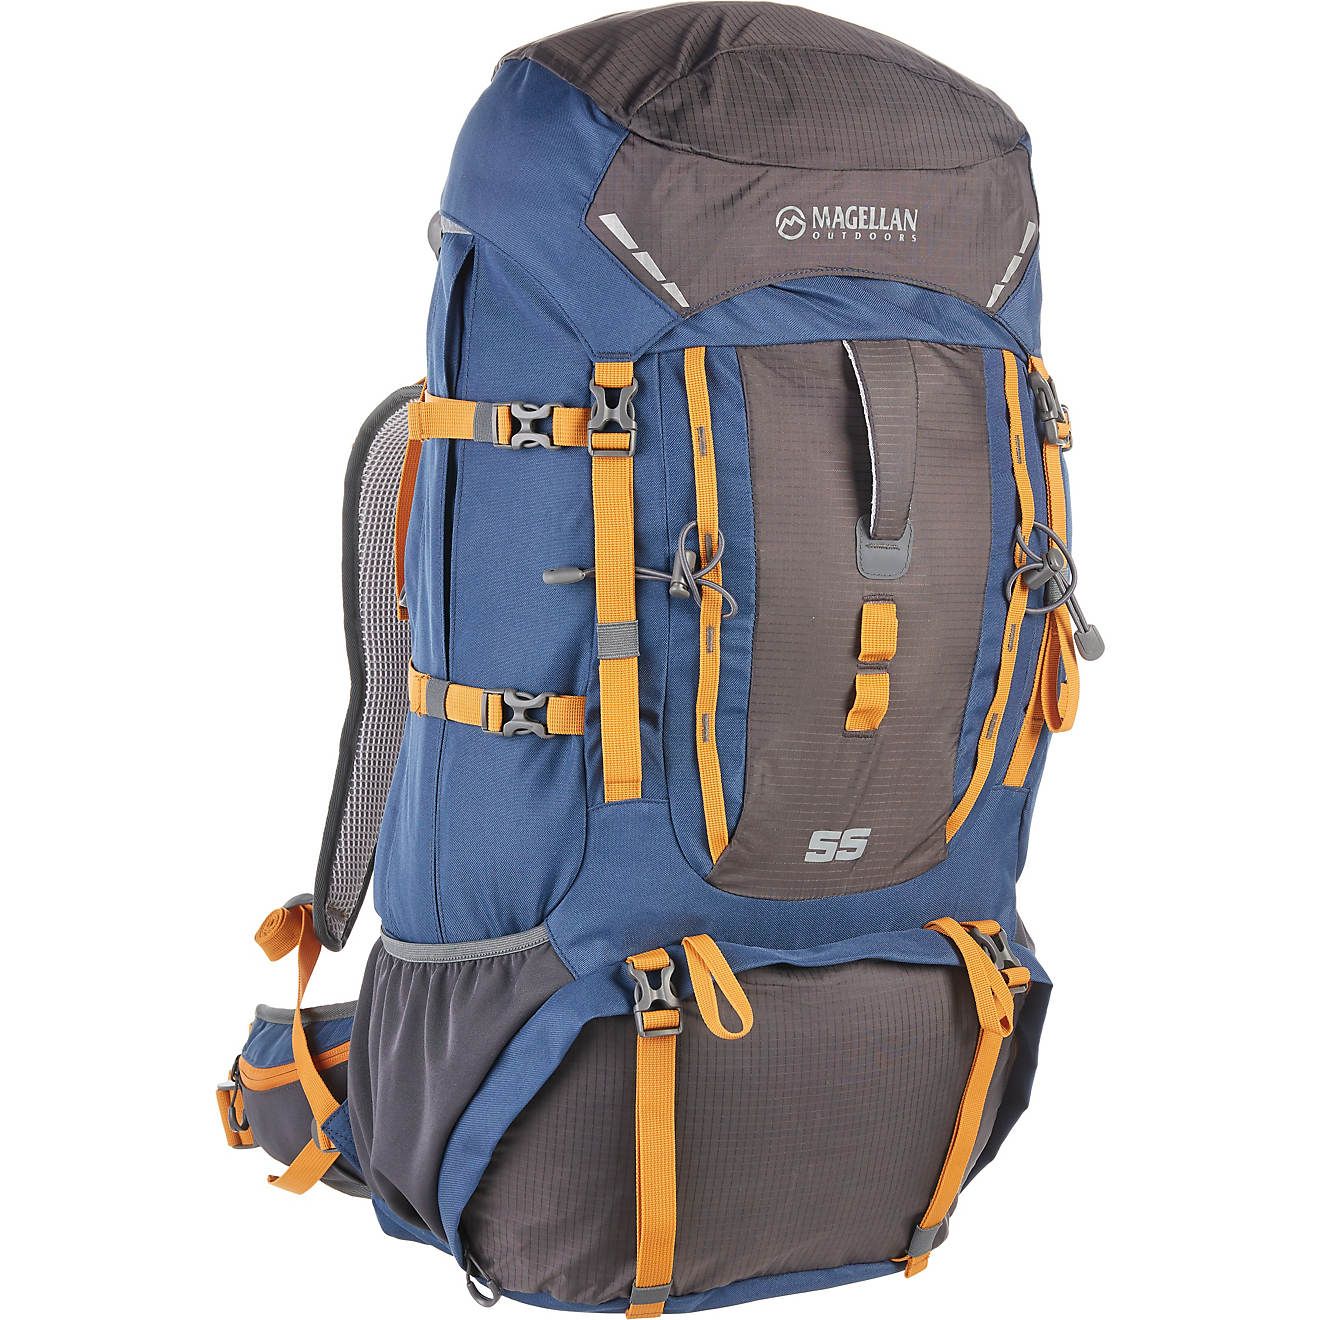 Magellan Outdoors 55L Technical Frame Pack | Academy | Academy Sports + Outdoors